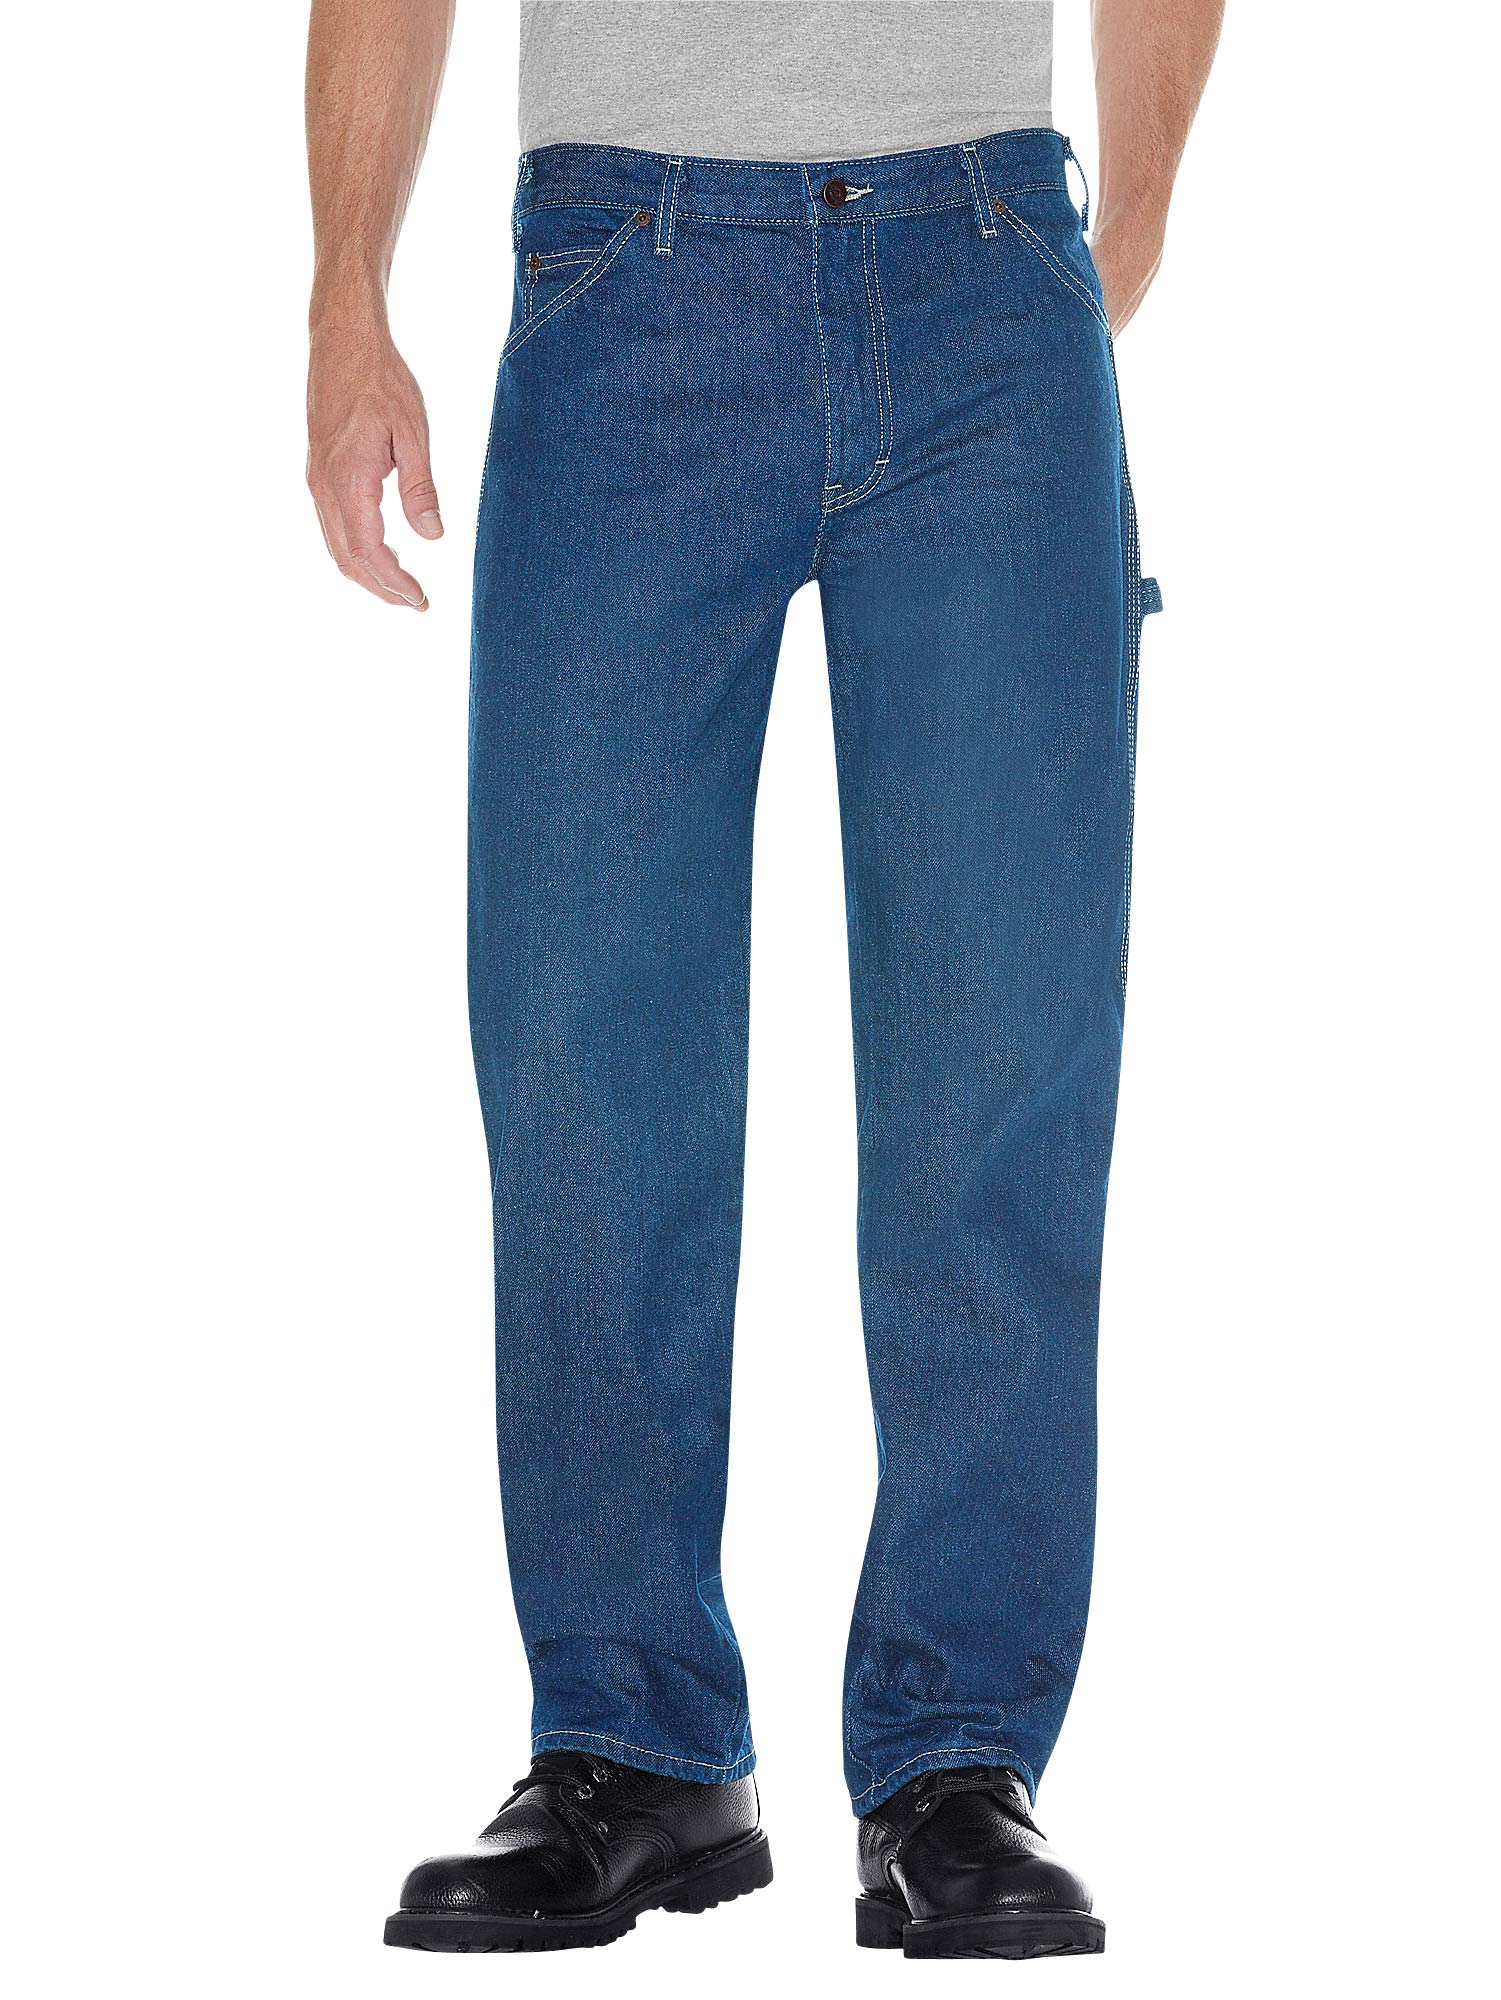 Dickies Relaxed Fit Carpenter Jean - 1993